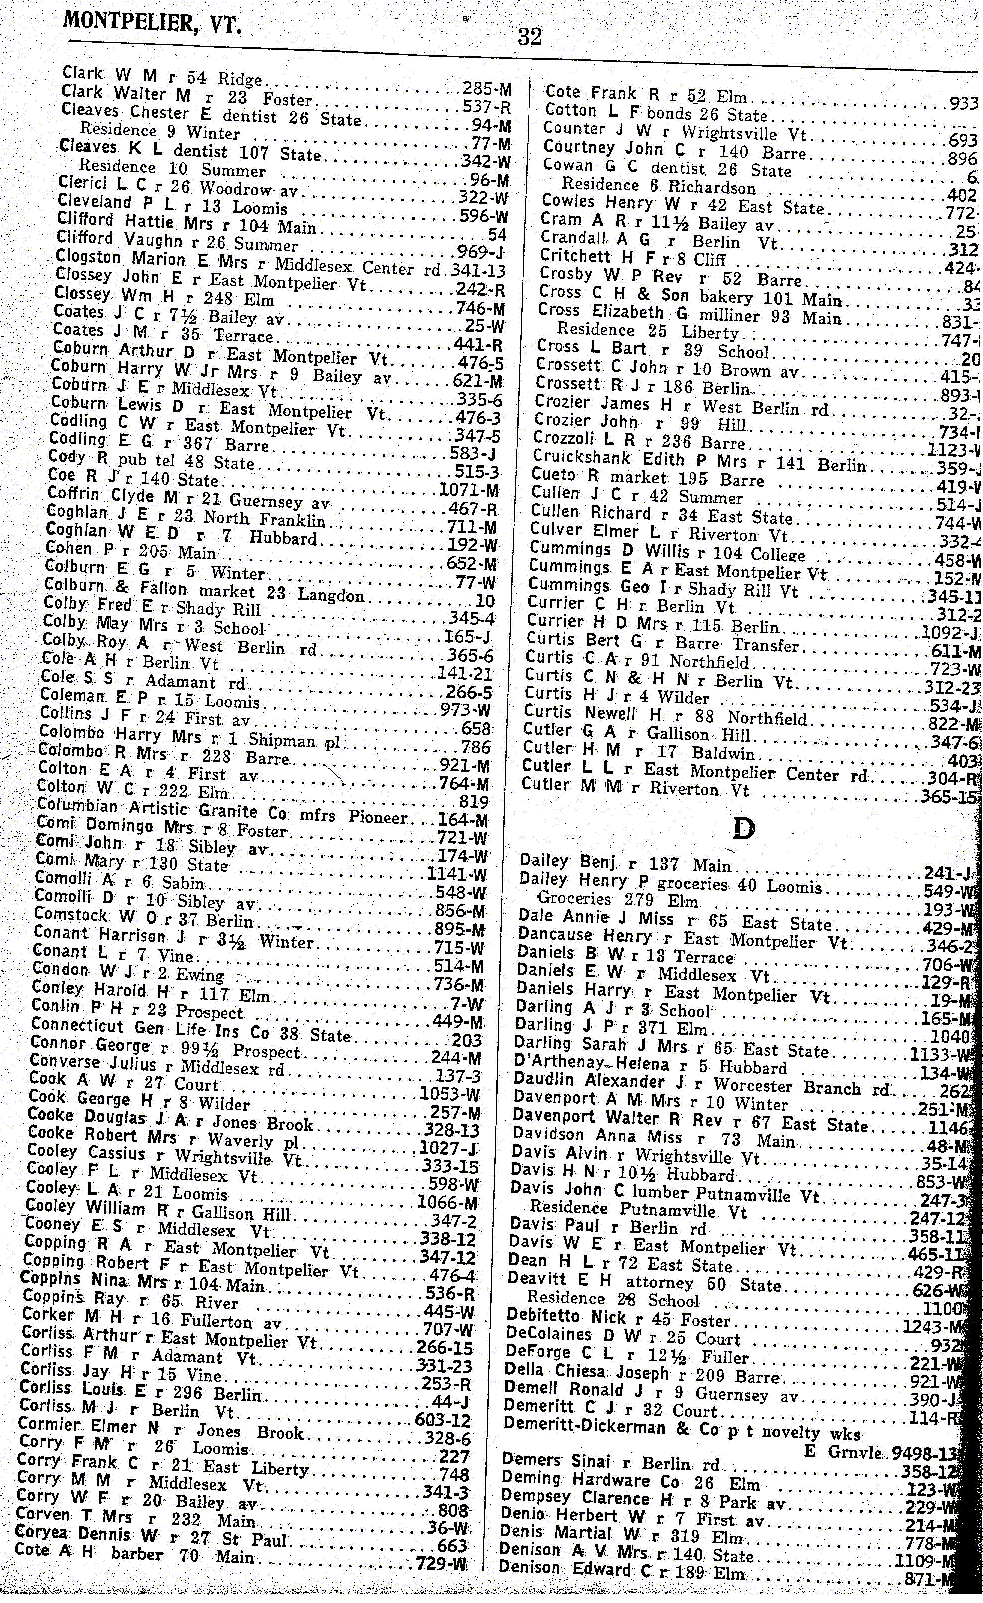 1928 Montpelier Vt Telephone Book - Page 32